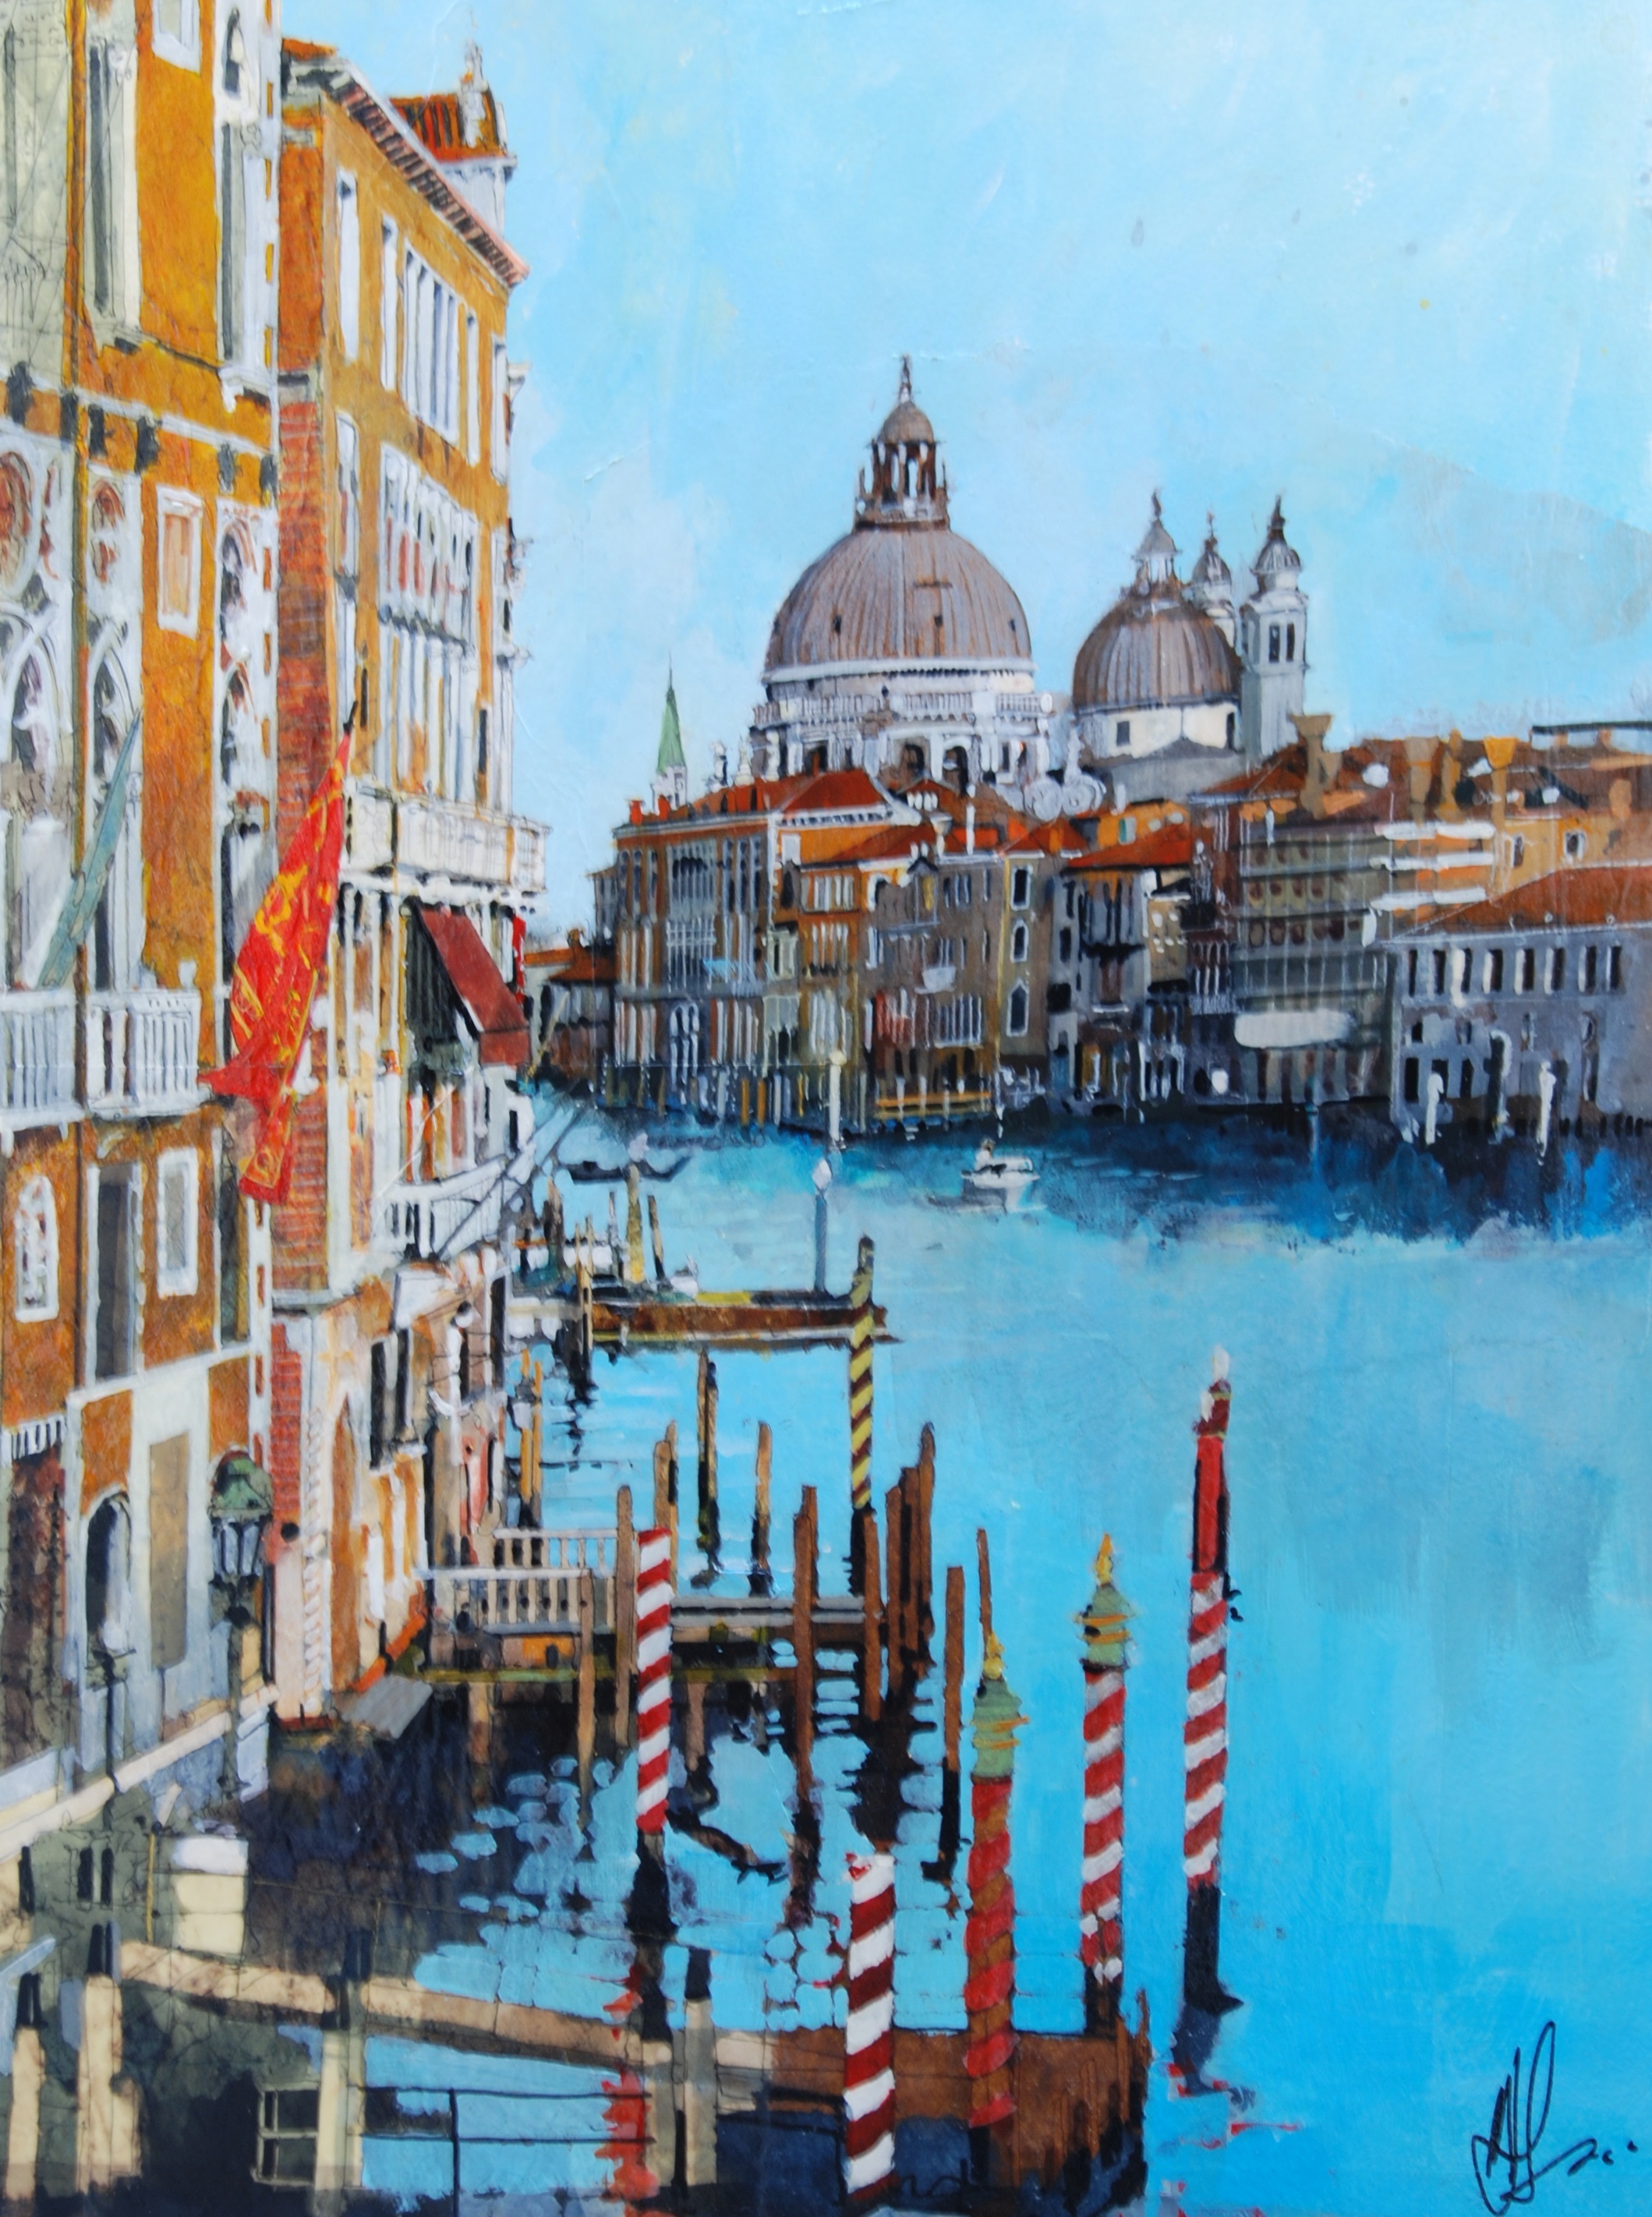 'Grand Canal Venice' by artist Malcolm Cheape